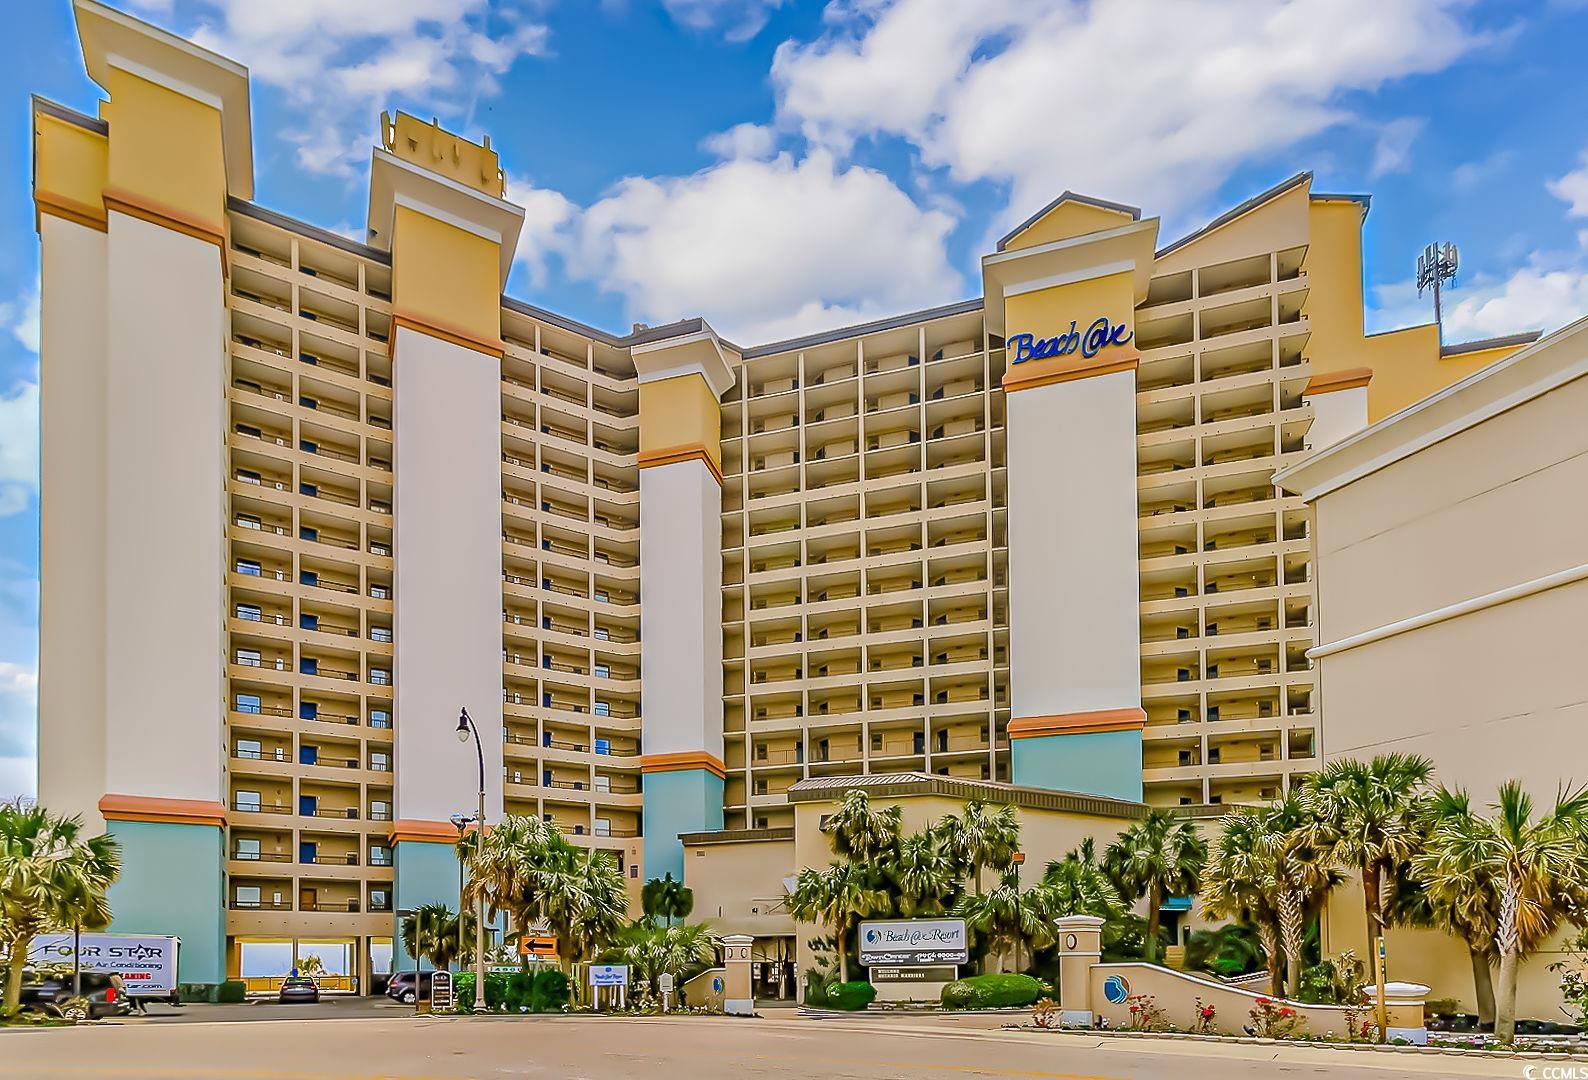 discover the enchanting beach cove resort in sunny north myrtle beach! this captivating 1-bedroom, 1-bathroom oceanfront condo offers a serene balcony with endless ocean views. immerse yourself in vacation bliss at the three outdoor pools, or let the gentle current carry you on the 350-foot lazy river. relax and rejuvenate in the indoor pool. indulge your taste buds with a delectable meal at the on-site restaurant and bar. unwind and feel the stress melt away in one of the three oceanfront whirlpools. lounge on the tropical outdoor pool deck, or let the little ones make a splash in the outdoor kiddie pool. keep up with your fitness routine at the exercise room or enjoy some arcade fun. grab a quick bite at the convenient grab n' go grill & coffee bar, or try the tempting offerings at breeze's beach bar and grill or tradewinds cafe. this condo boasts new lvp flooring, a new ac unit, and a new kitchen for added comfort. embrace the beachfront lifestyle and create cherished memories in this extraordinary retreat!